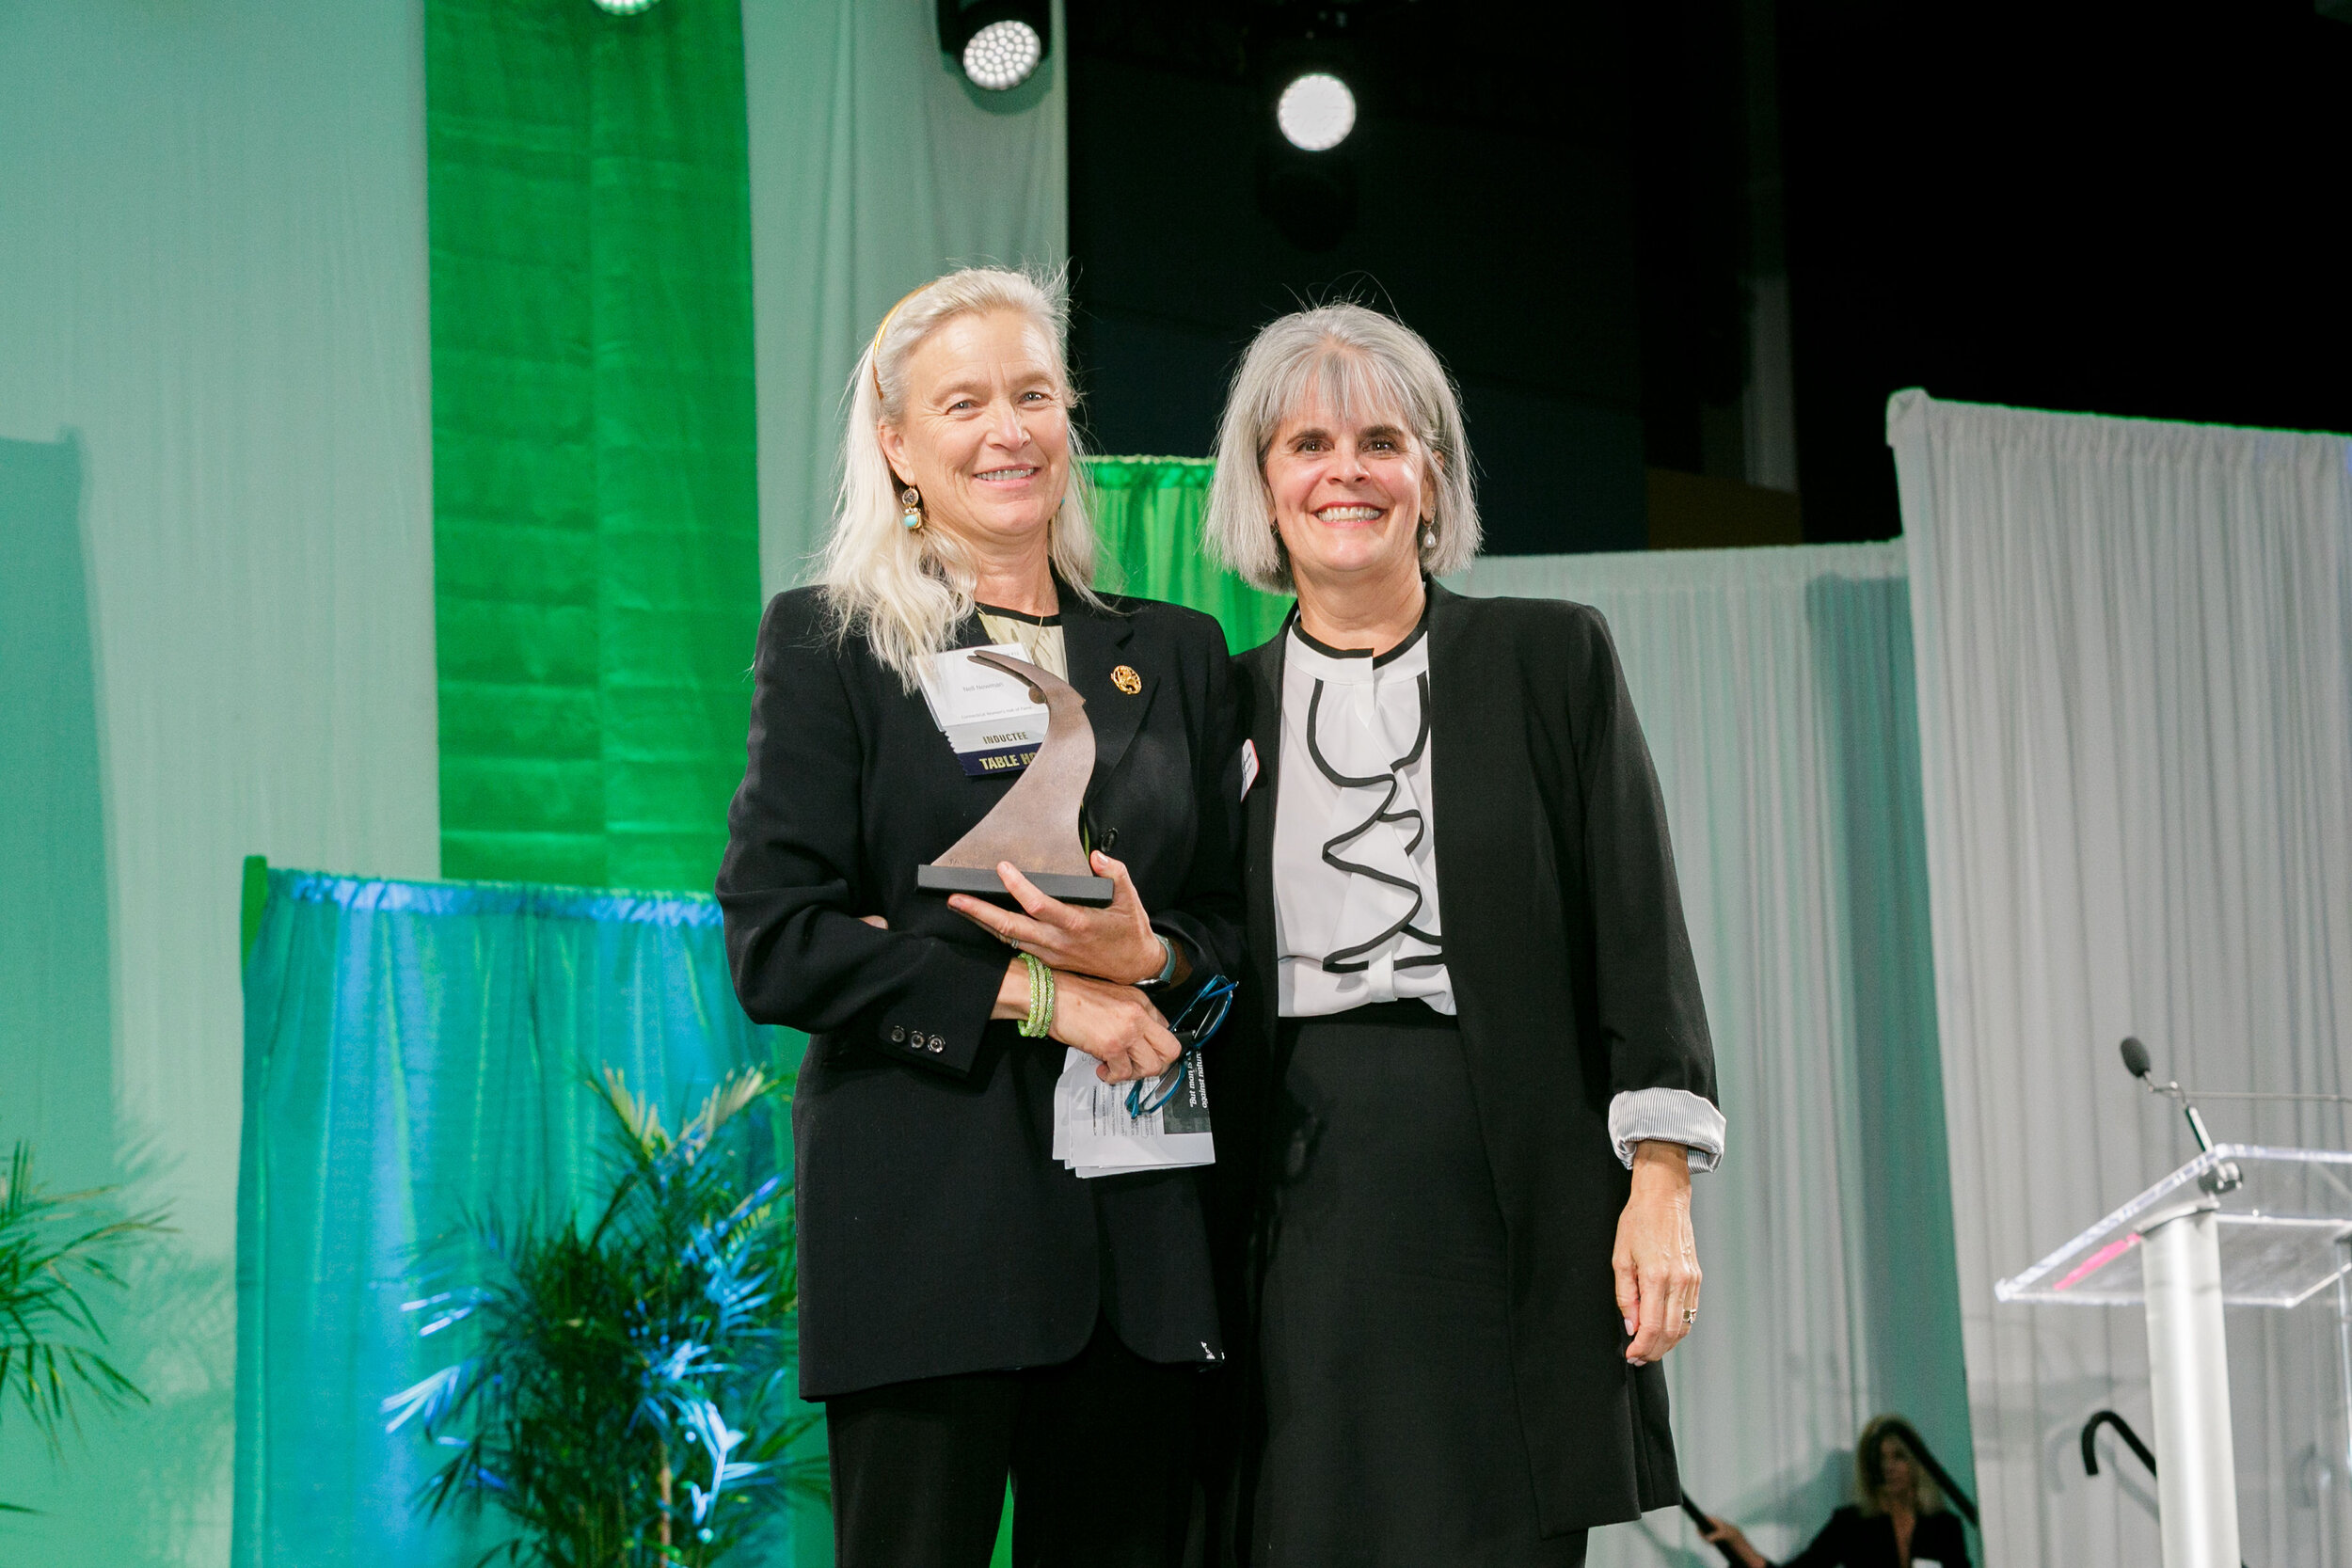   2019 Inductee, Nell Newman and CWHF Executive Director, Sarah Smith Lubarsky  